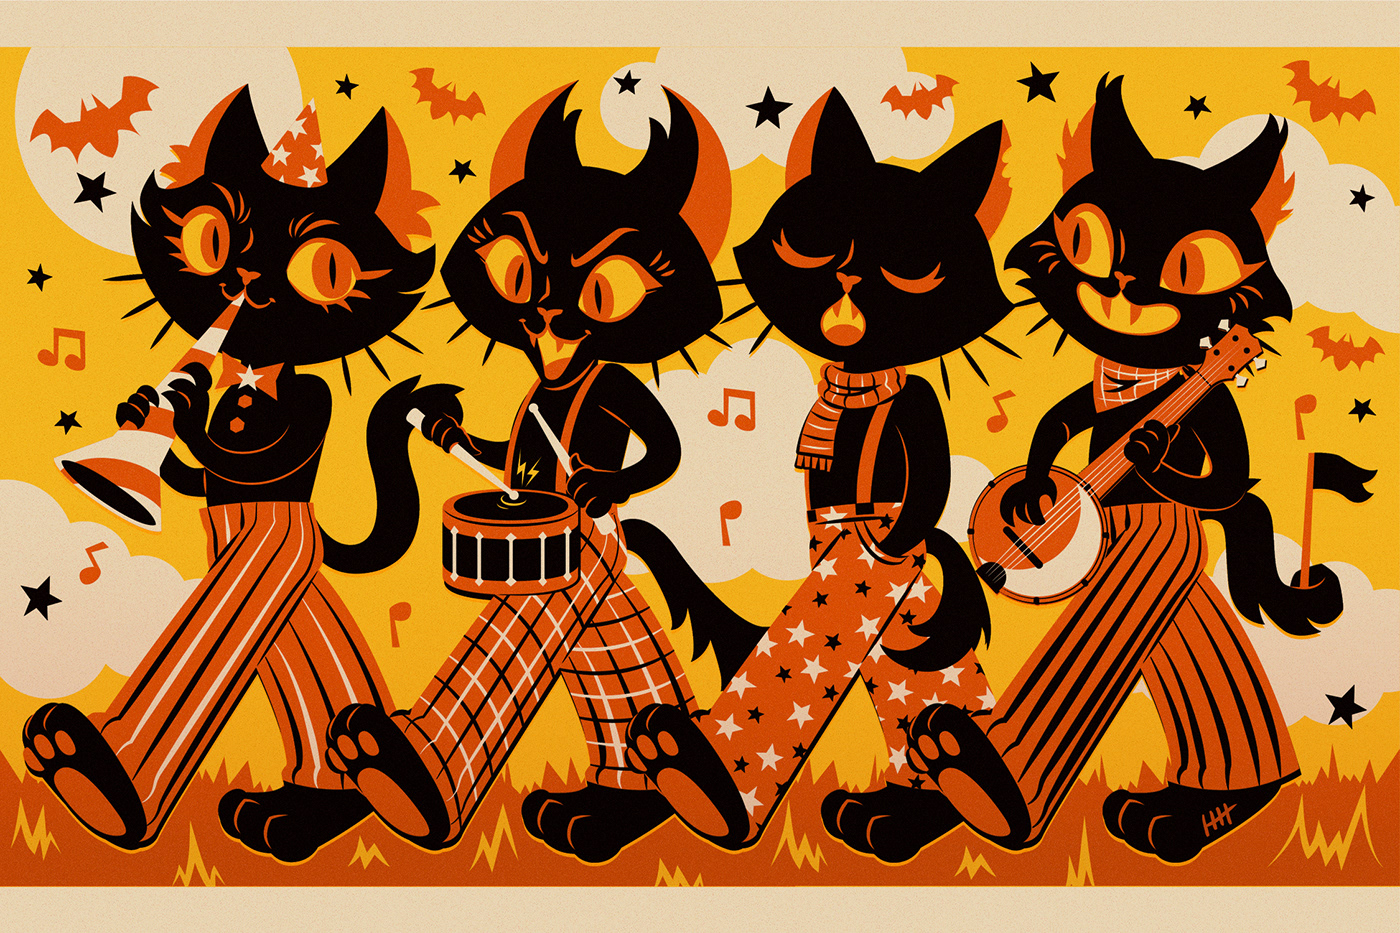 4 black cat characters marching and playing music